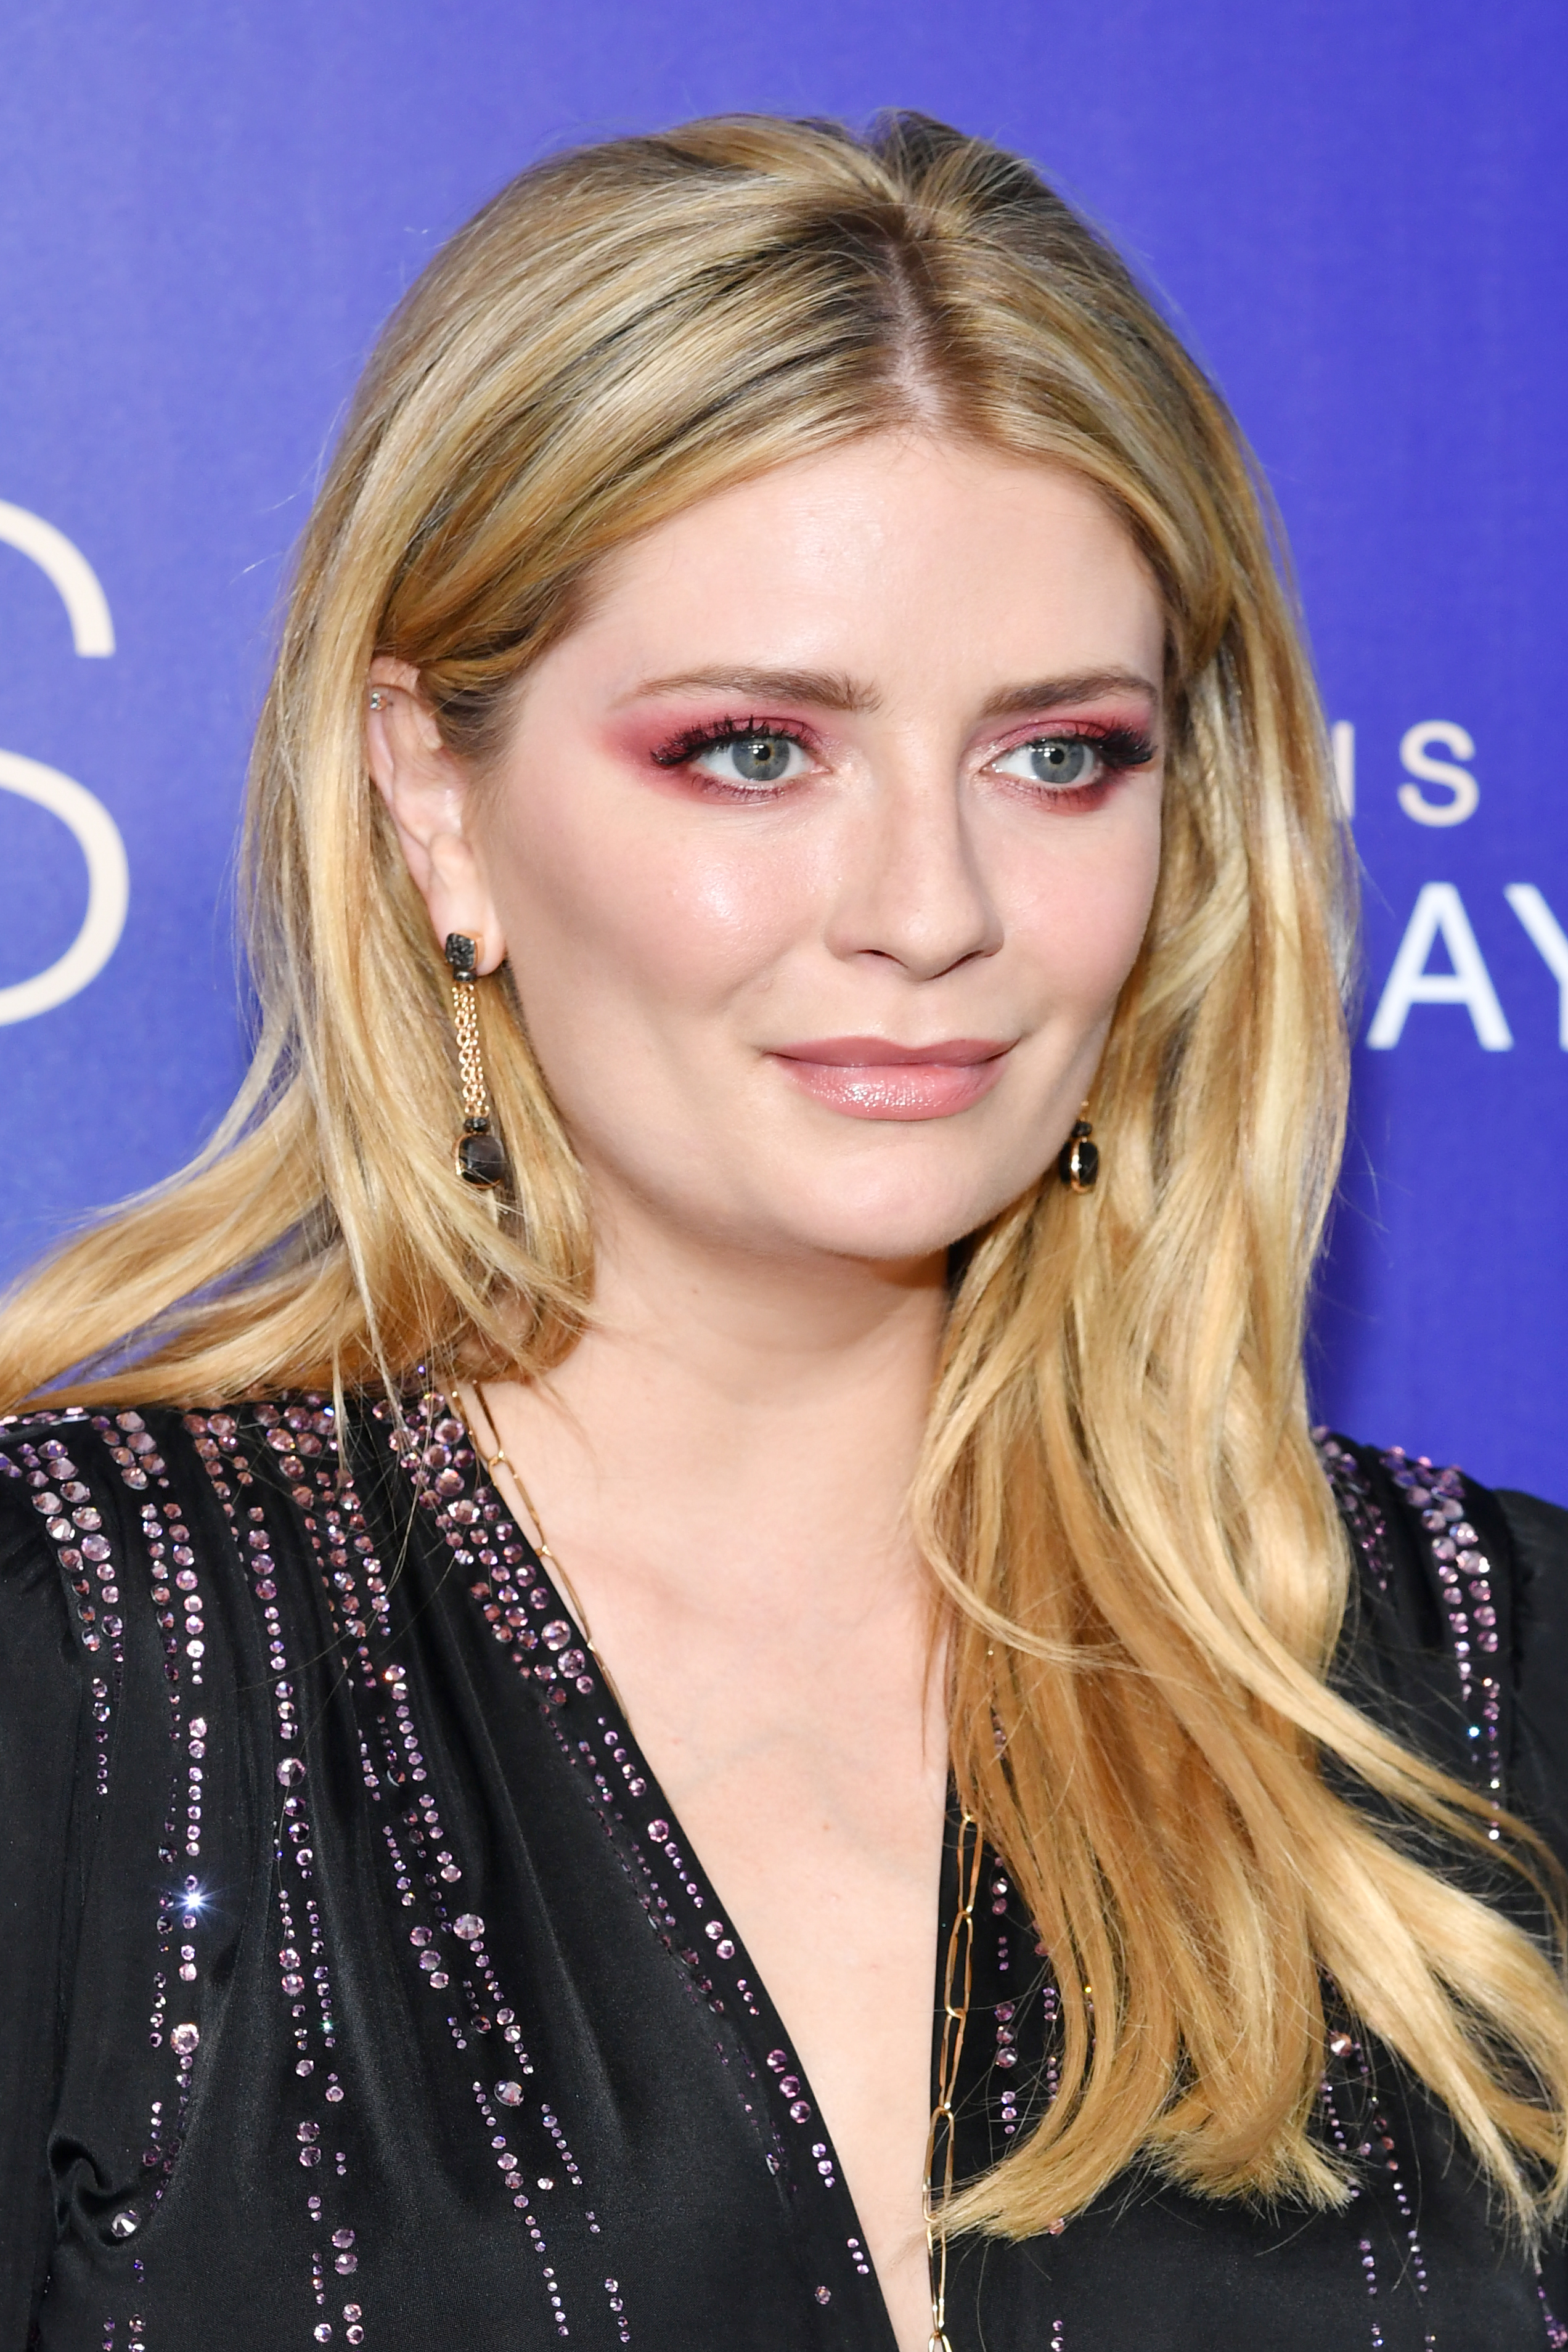 Mischa Barton at the MTV Premier of "The Hills: New Beginnings" on June 19, 2019, in L.A. | Source: Getty Images